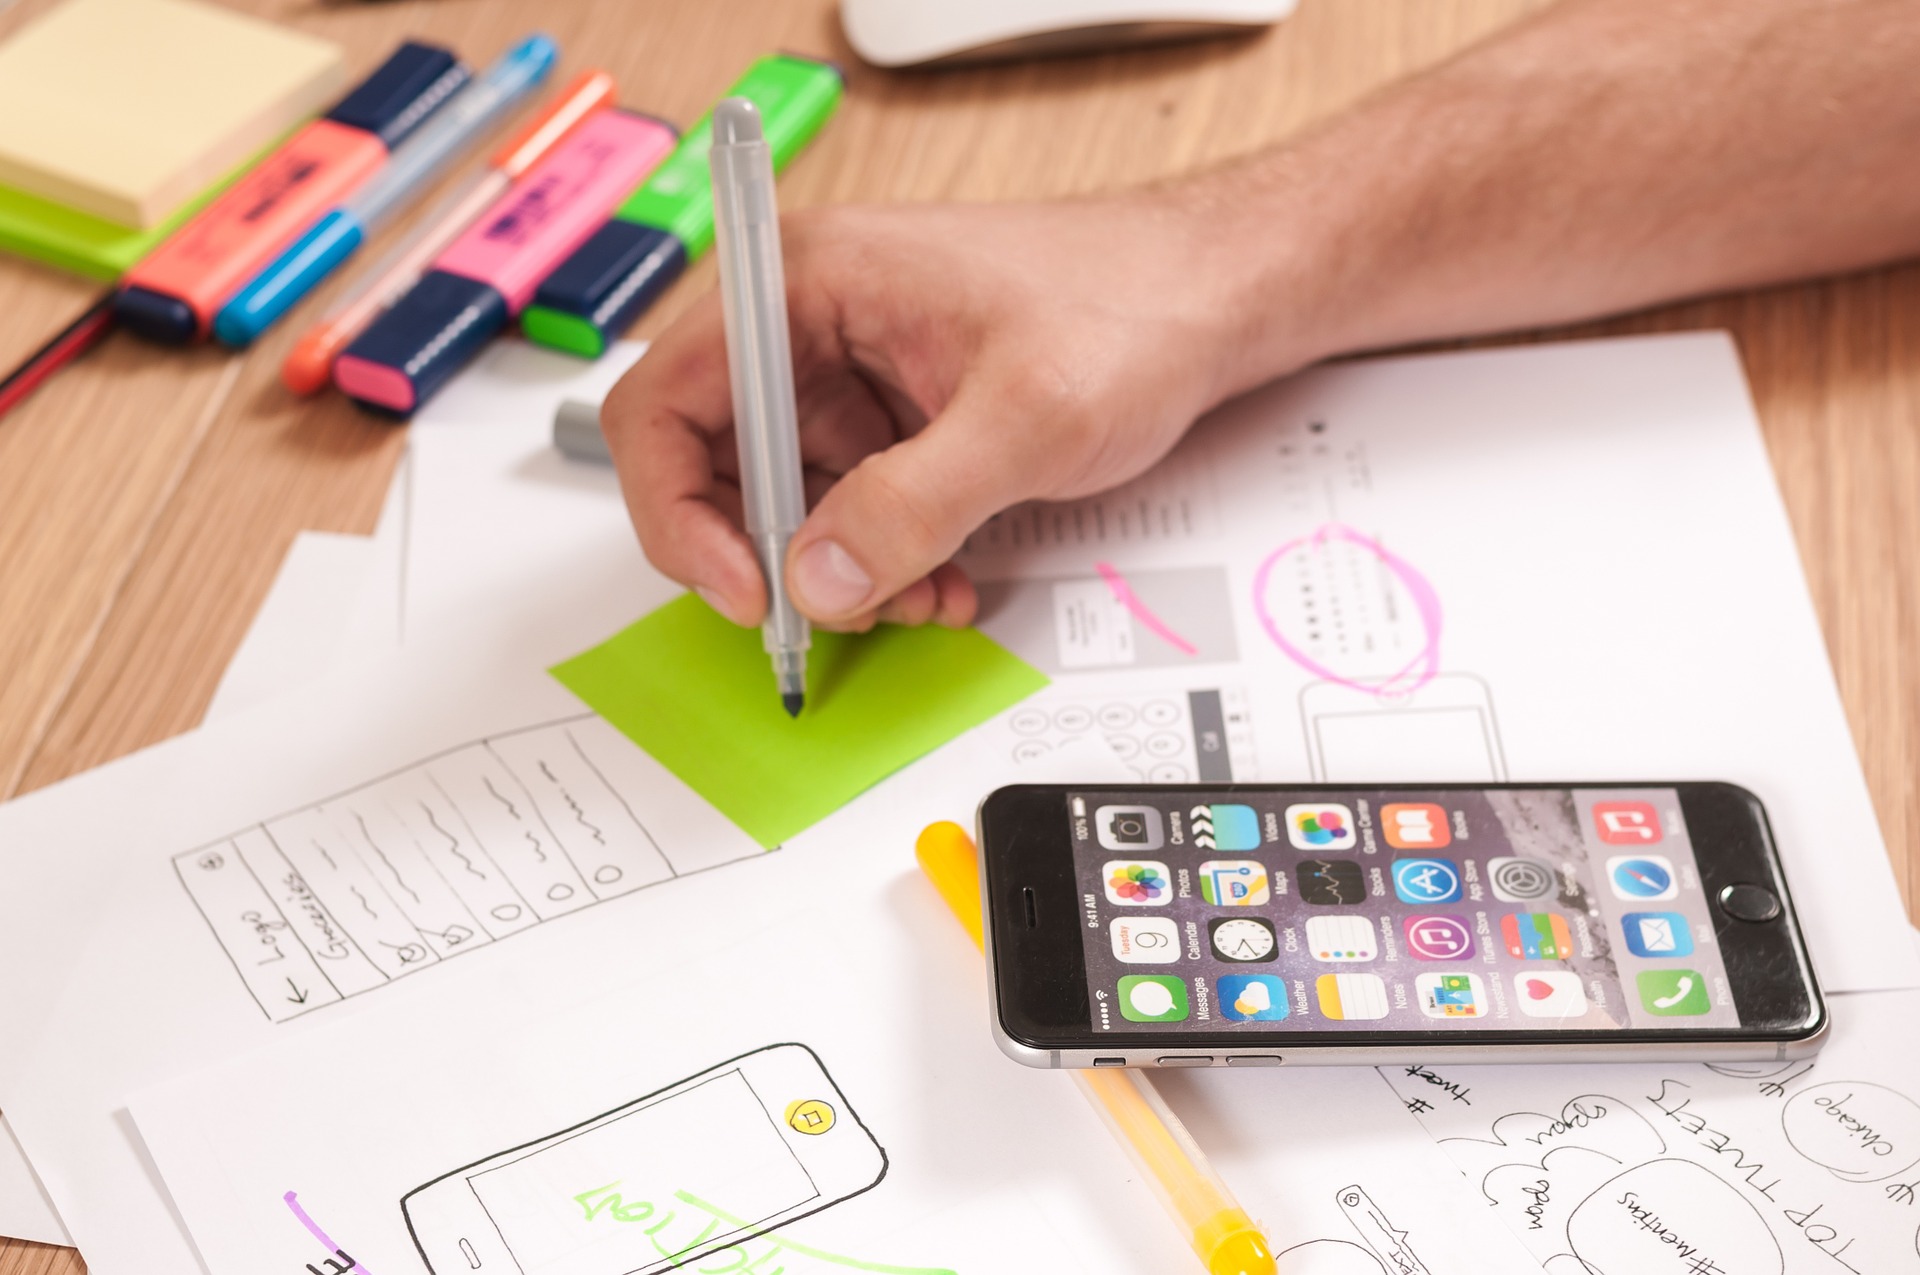 Why is User Experience (UX) design so important?